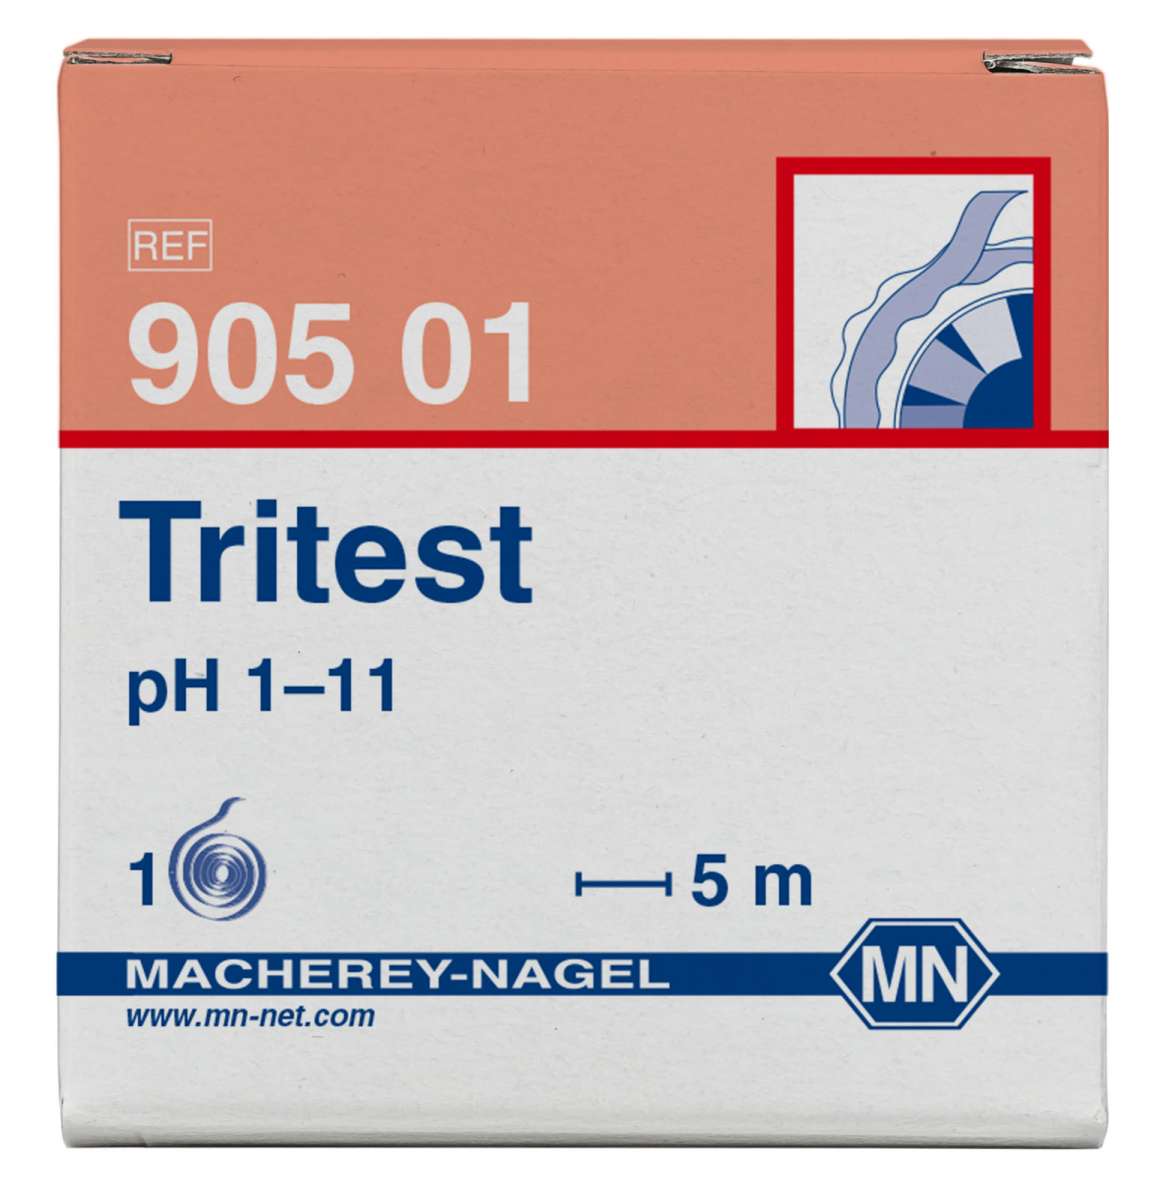 Refill pack for pH test paper Tritest pH 1-11 (3 reels of 5m length and 10mm width)